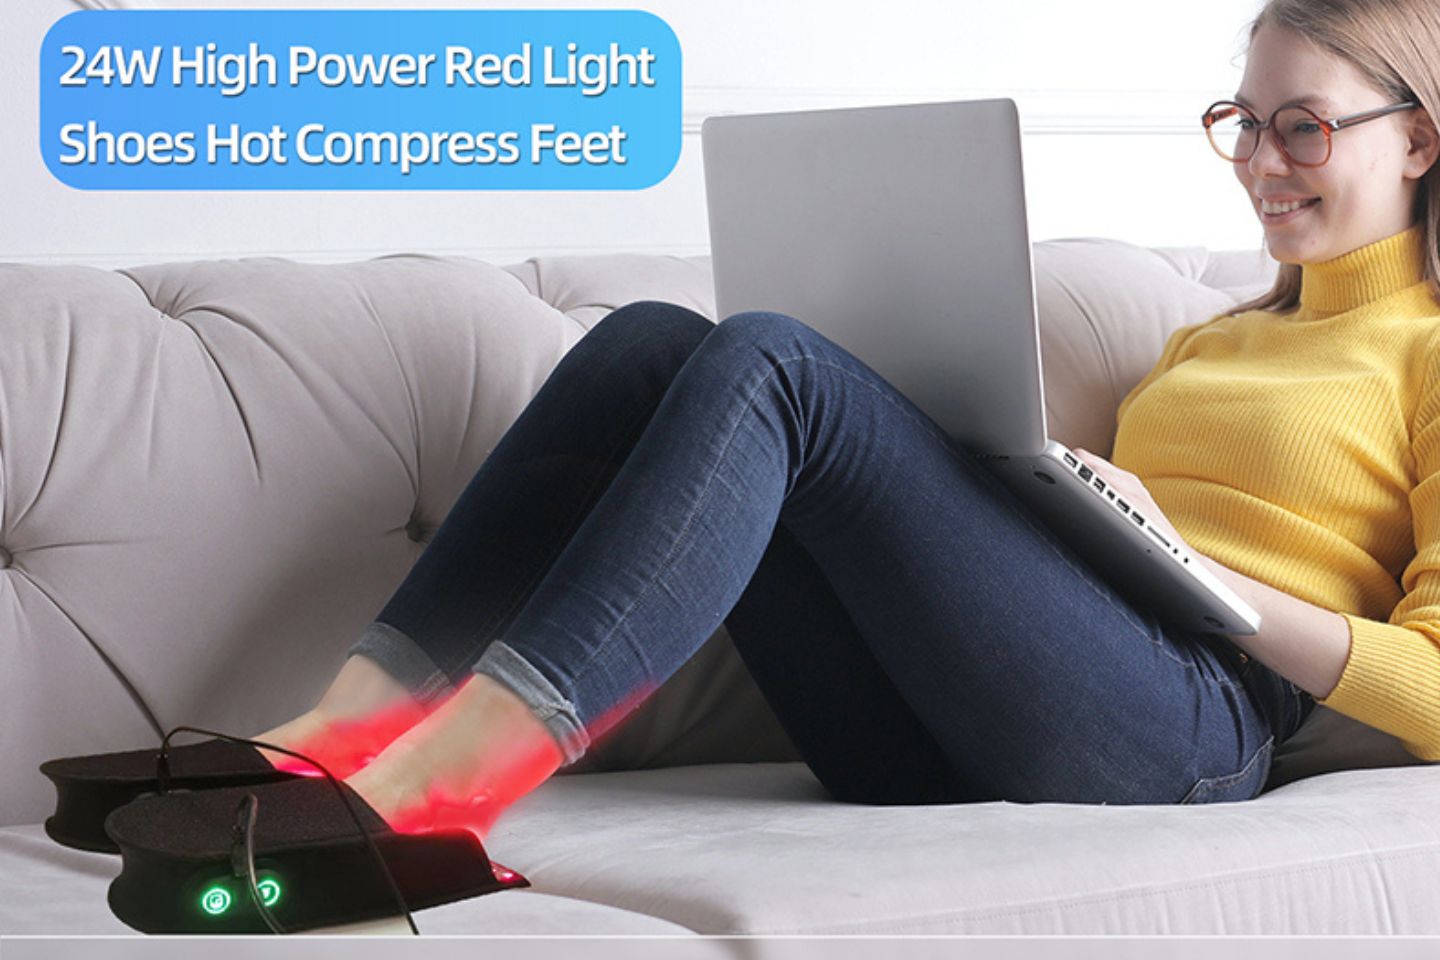 Top Rated Infrared Light Therapy Boots